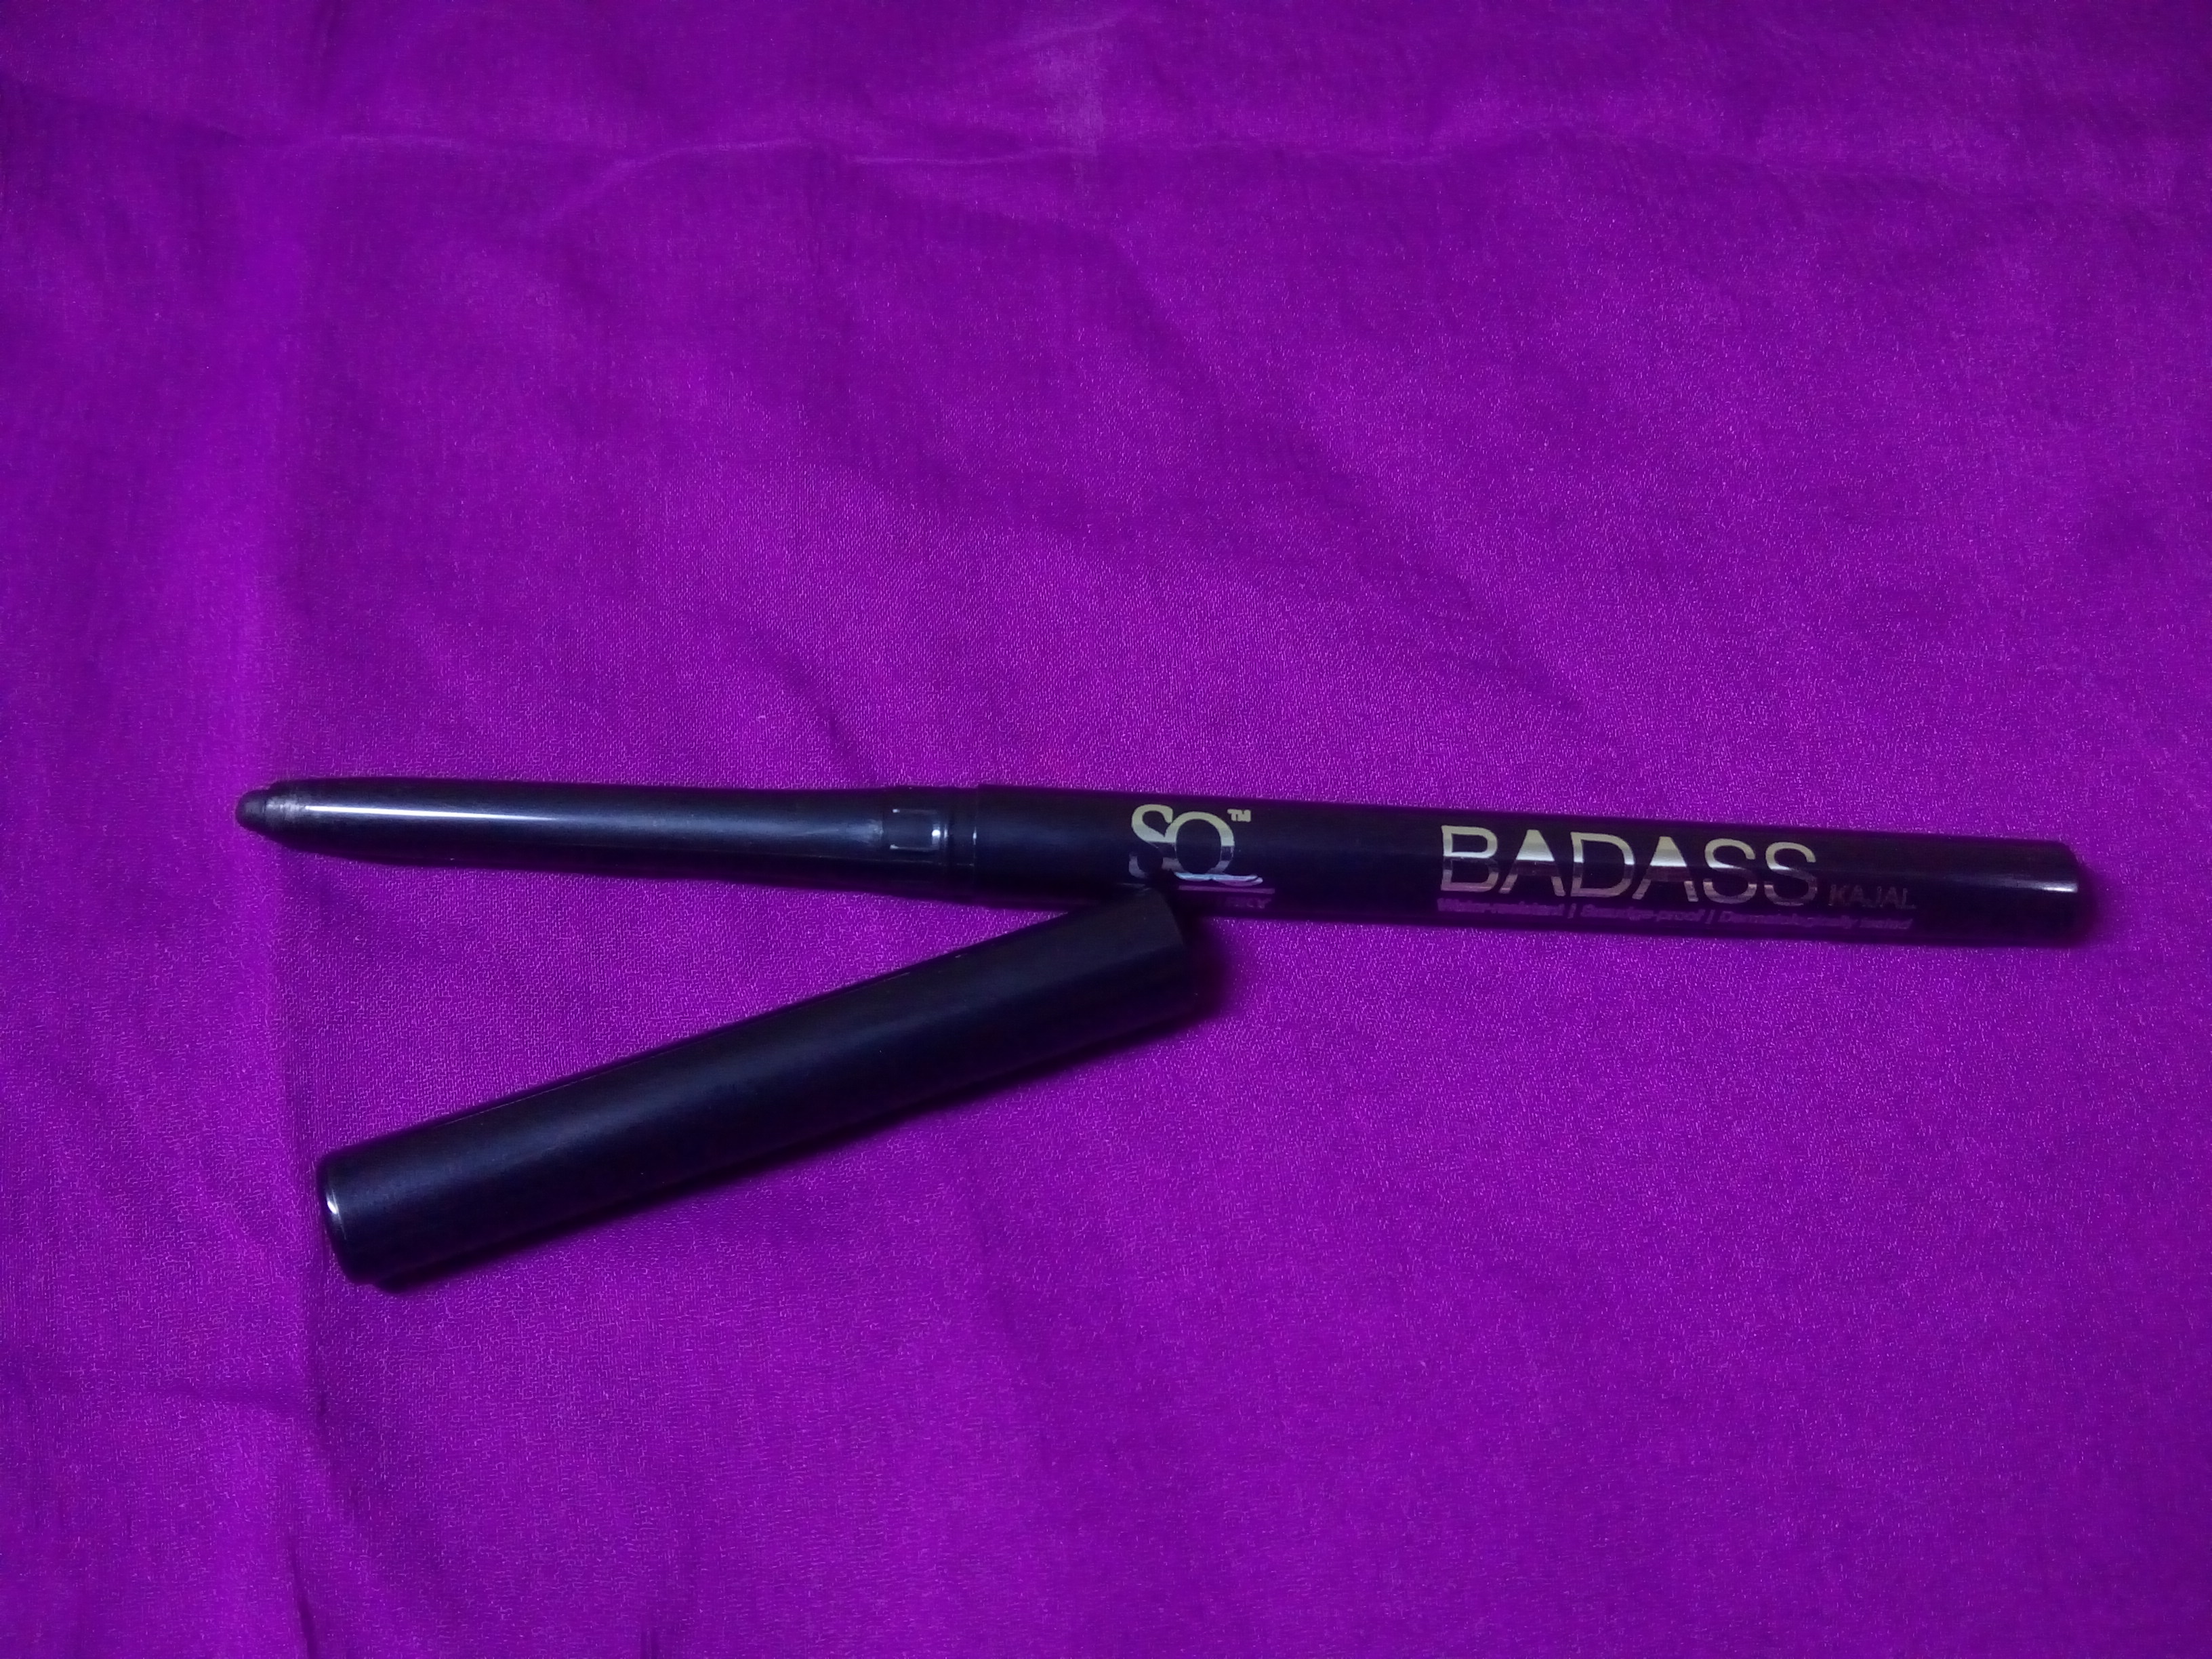 Stay Quirky Badass Kajal (Black)| Review & Swatch